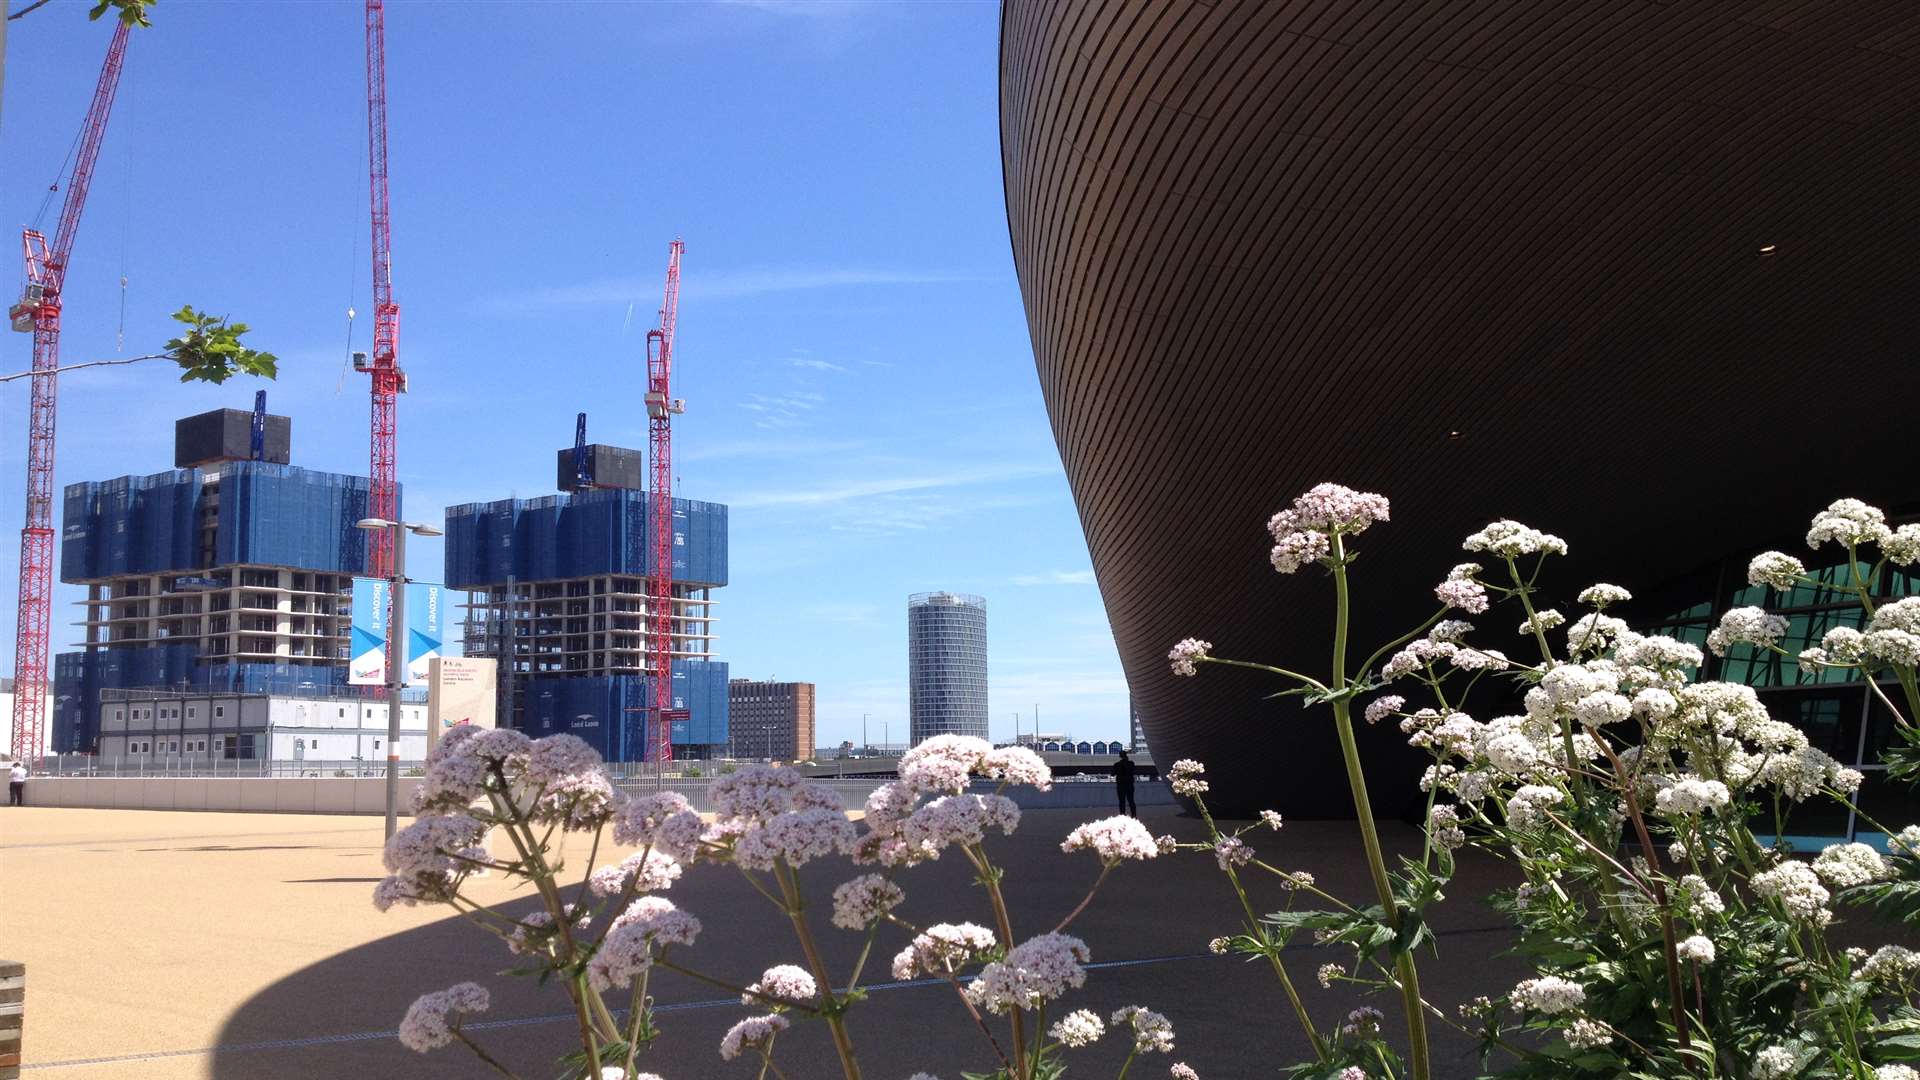 Beautiful planting against a backdrop of development in East London